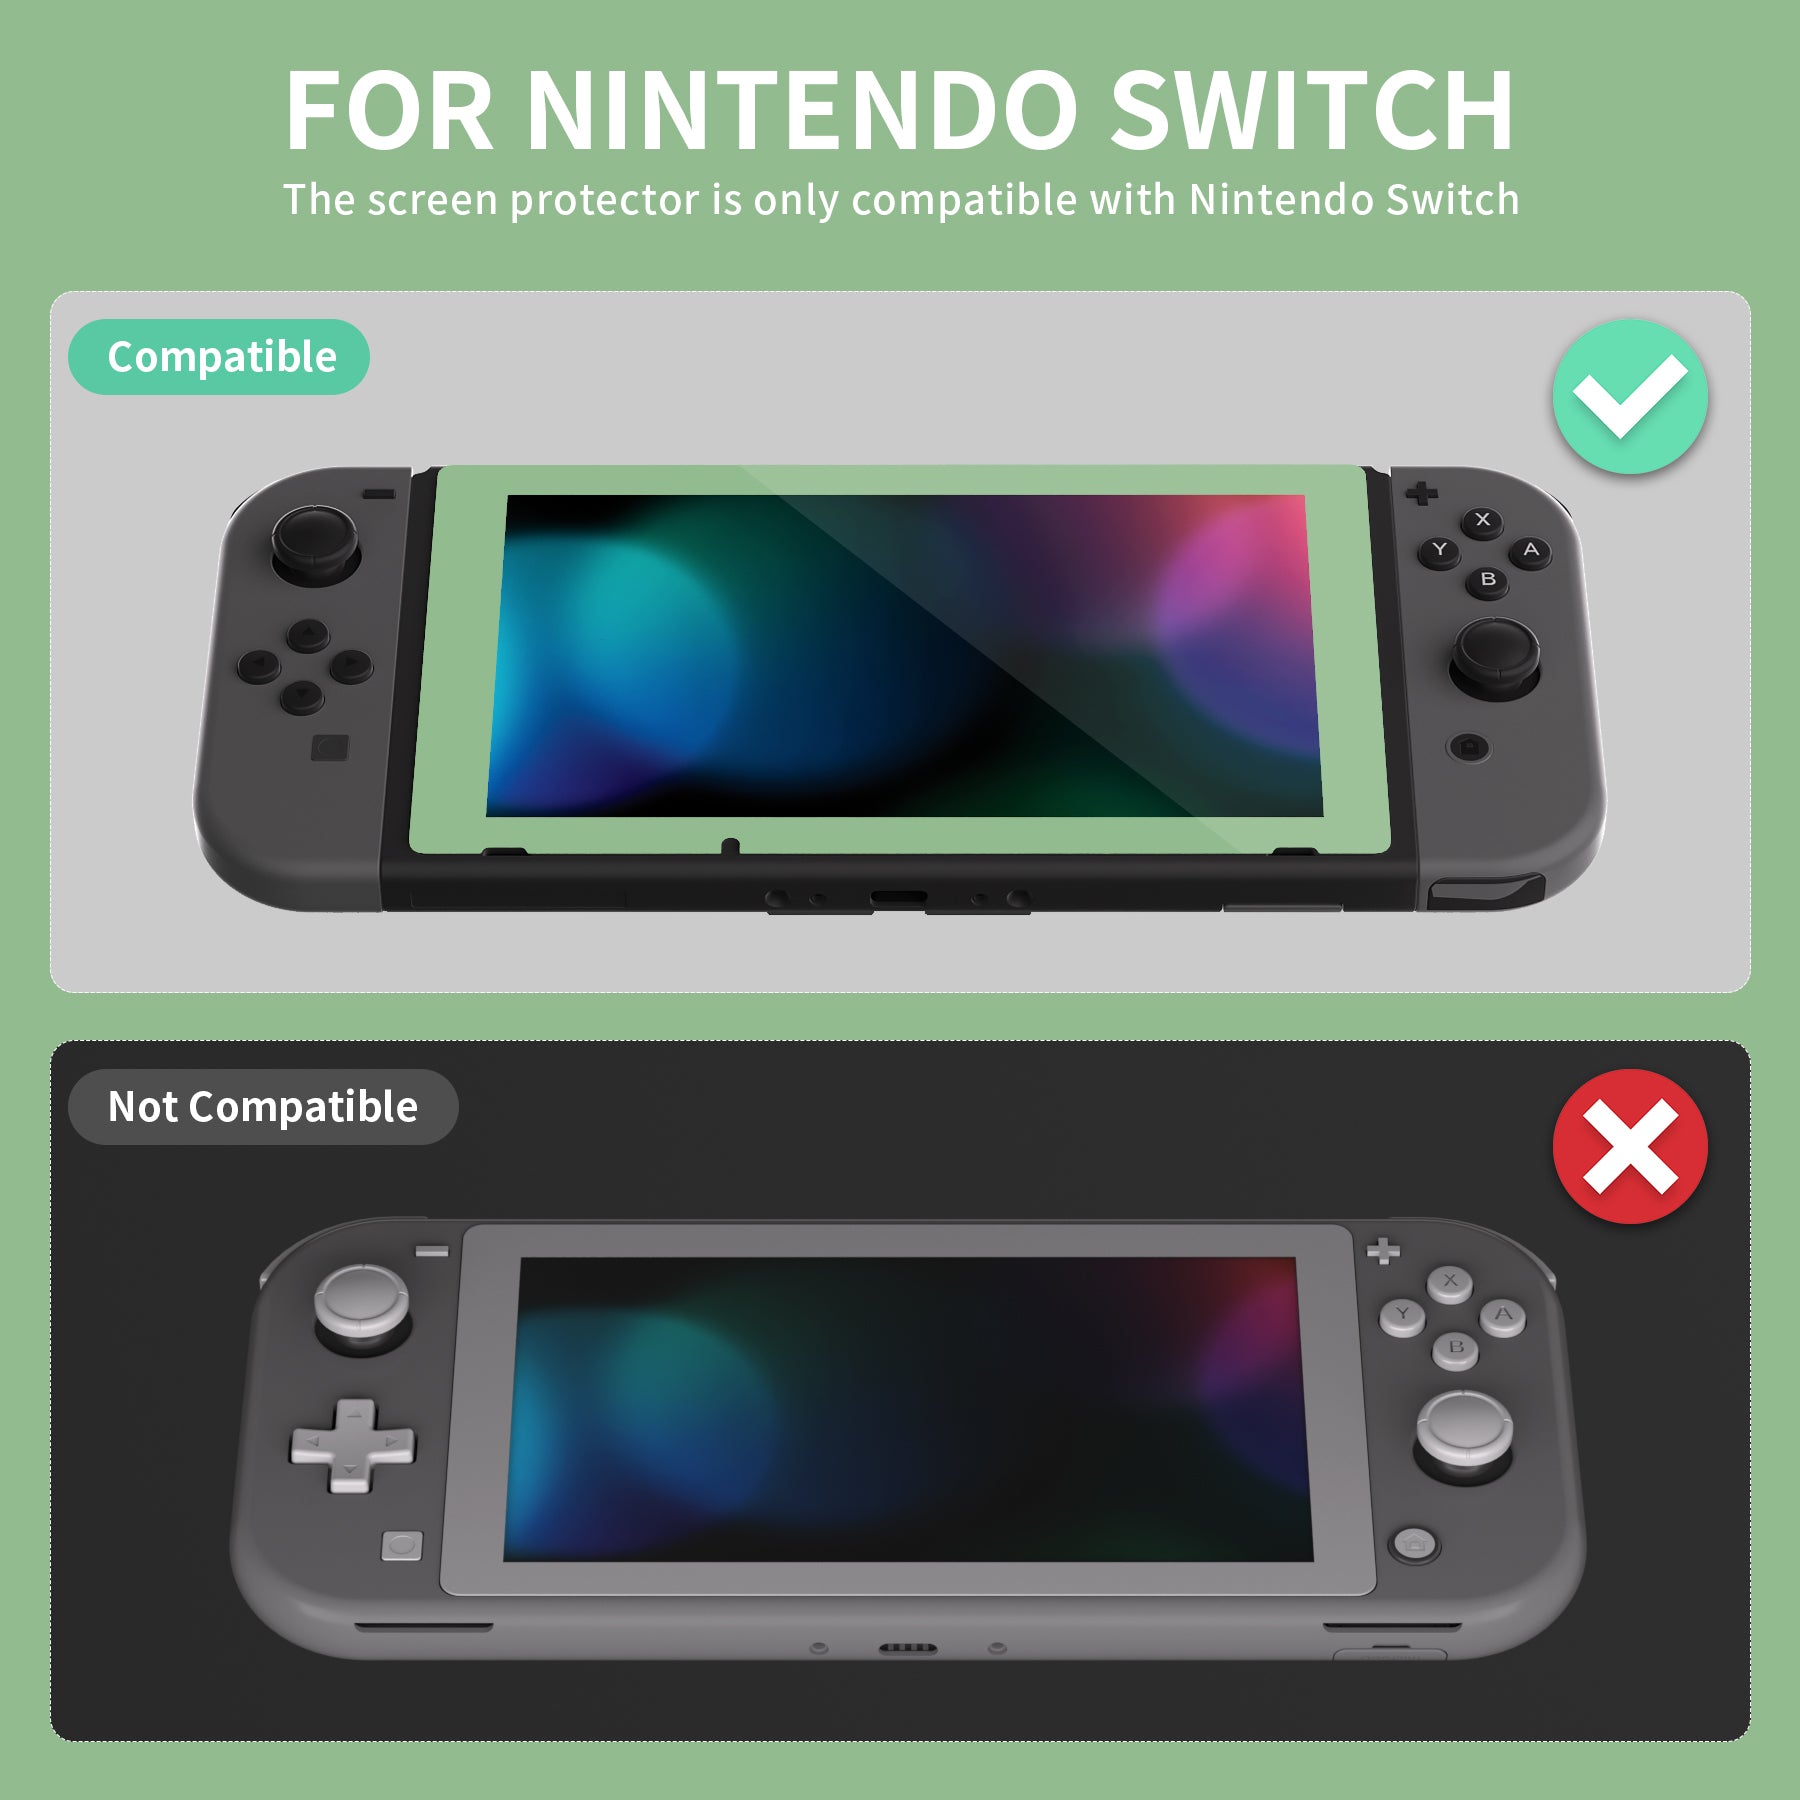 2 Pack Matcha Green Border Transparent HD Clear Saver Protector Film, Tempered Glass Screen Protector for Nintendo Switch [Anti-Scratch, Anti-Fingerprint, Shatterproof, Bubble-Free] - NSPJ0708 playvital